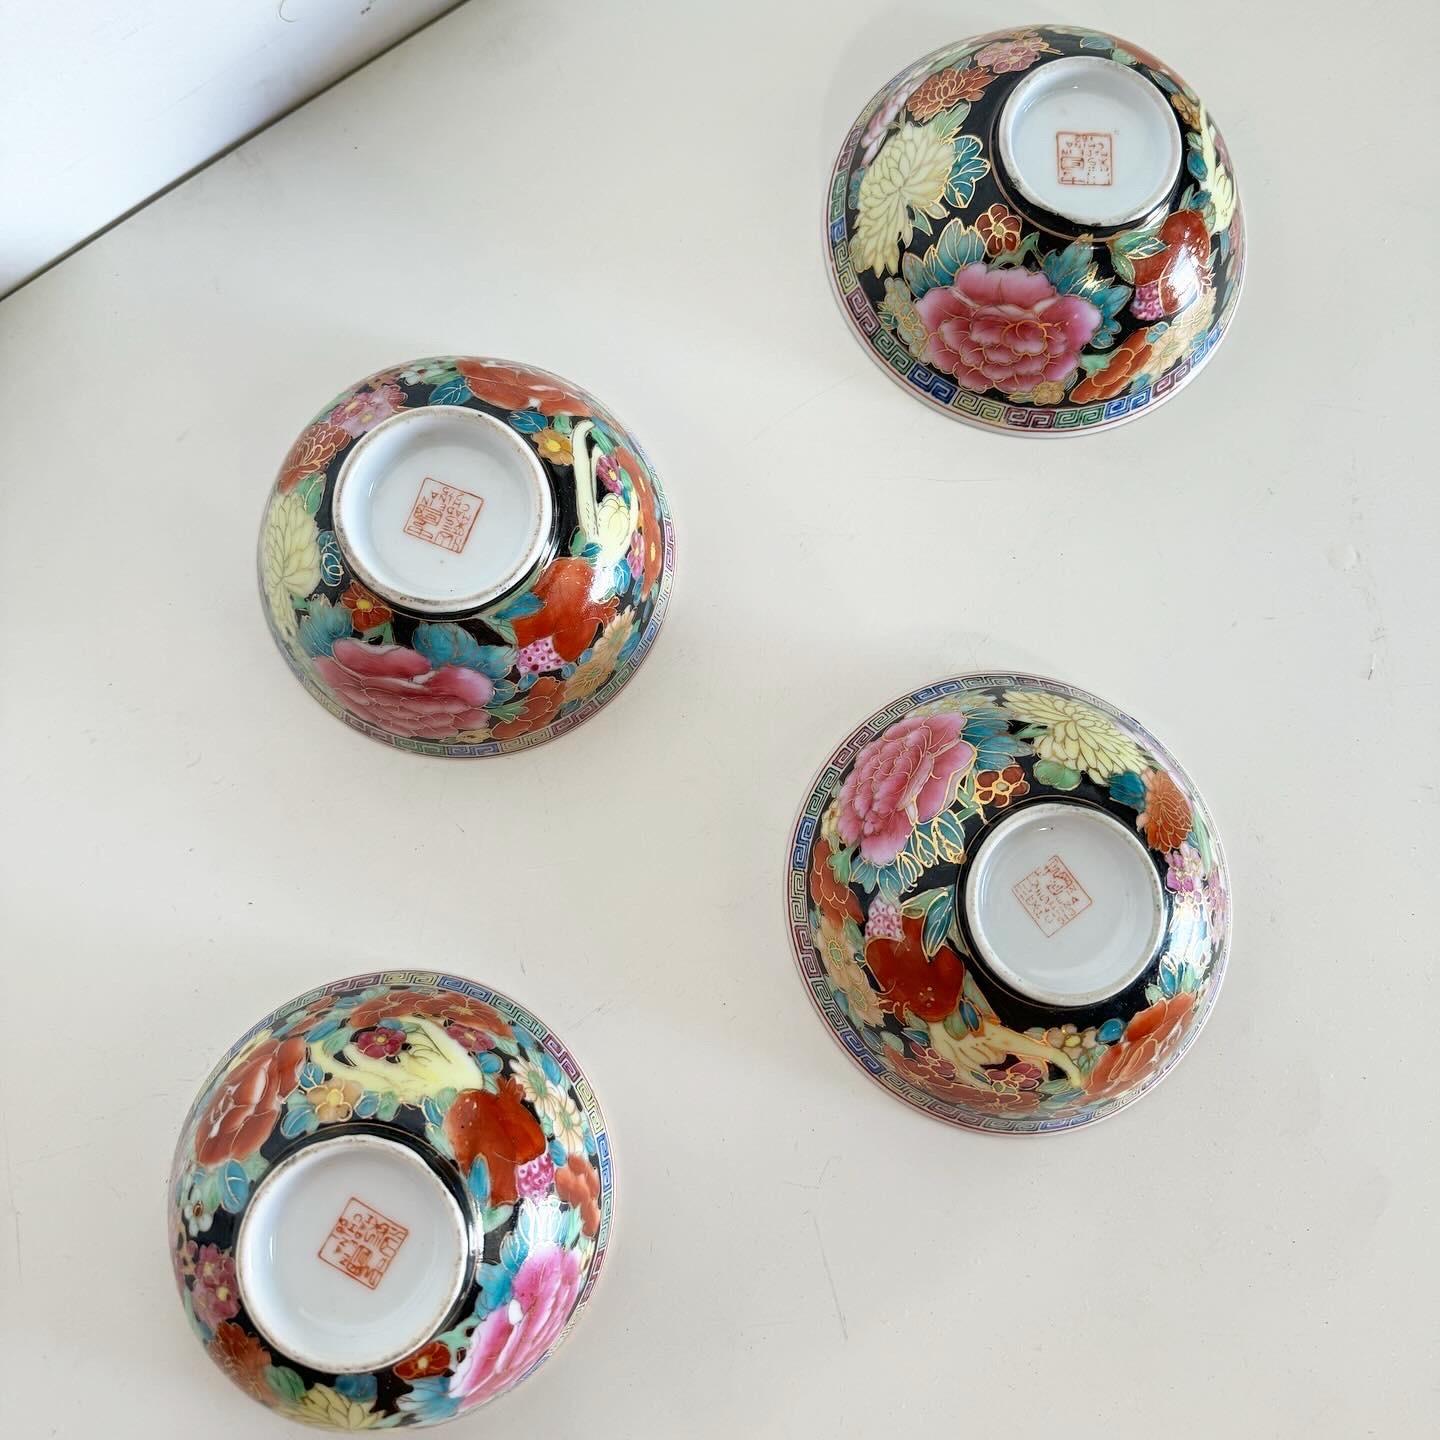 Delve into the elegance of traditional Chinese craftsmanship with a set of 4 hand-painted porcelain bowls. Adorned with vibrant designs, from floral patterns to majestic dragons, these bowls exemplify the finesse of Chinese porcelain art. Ideal for